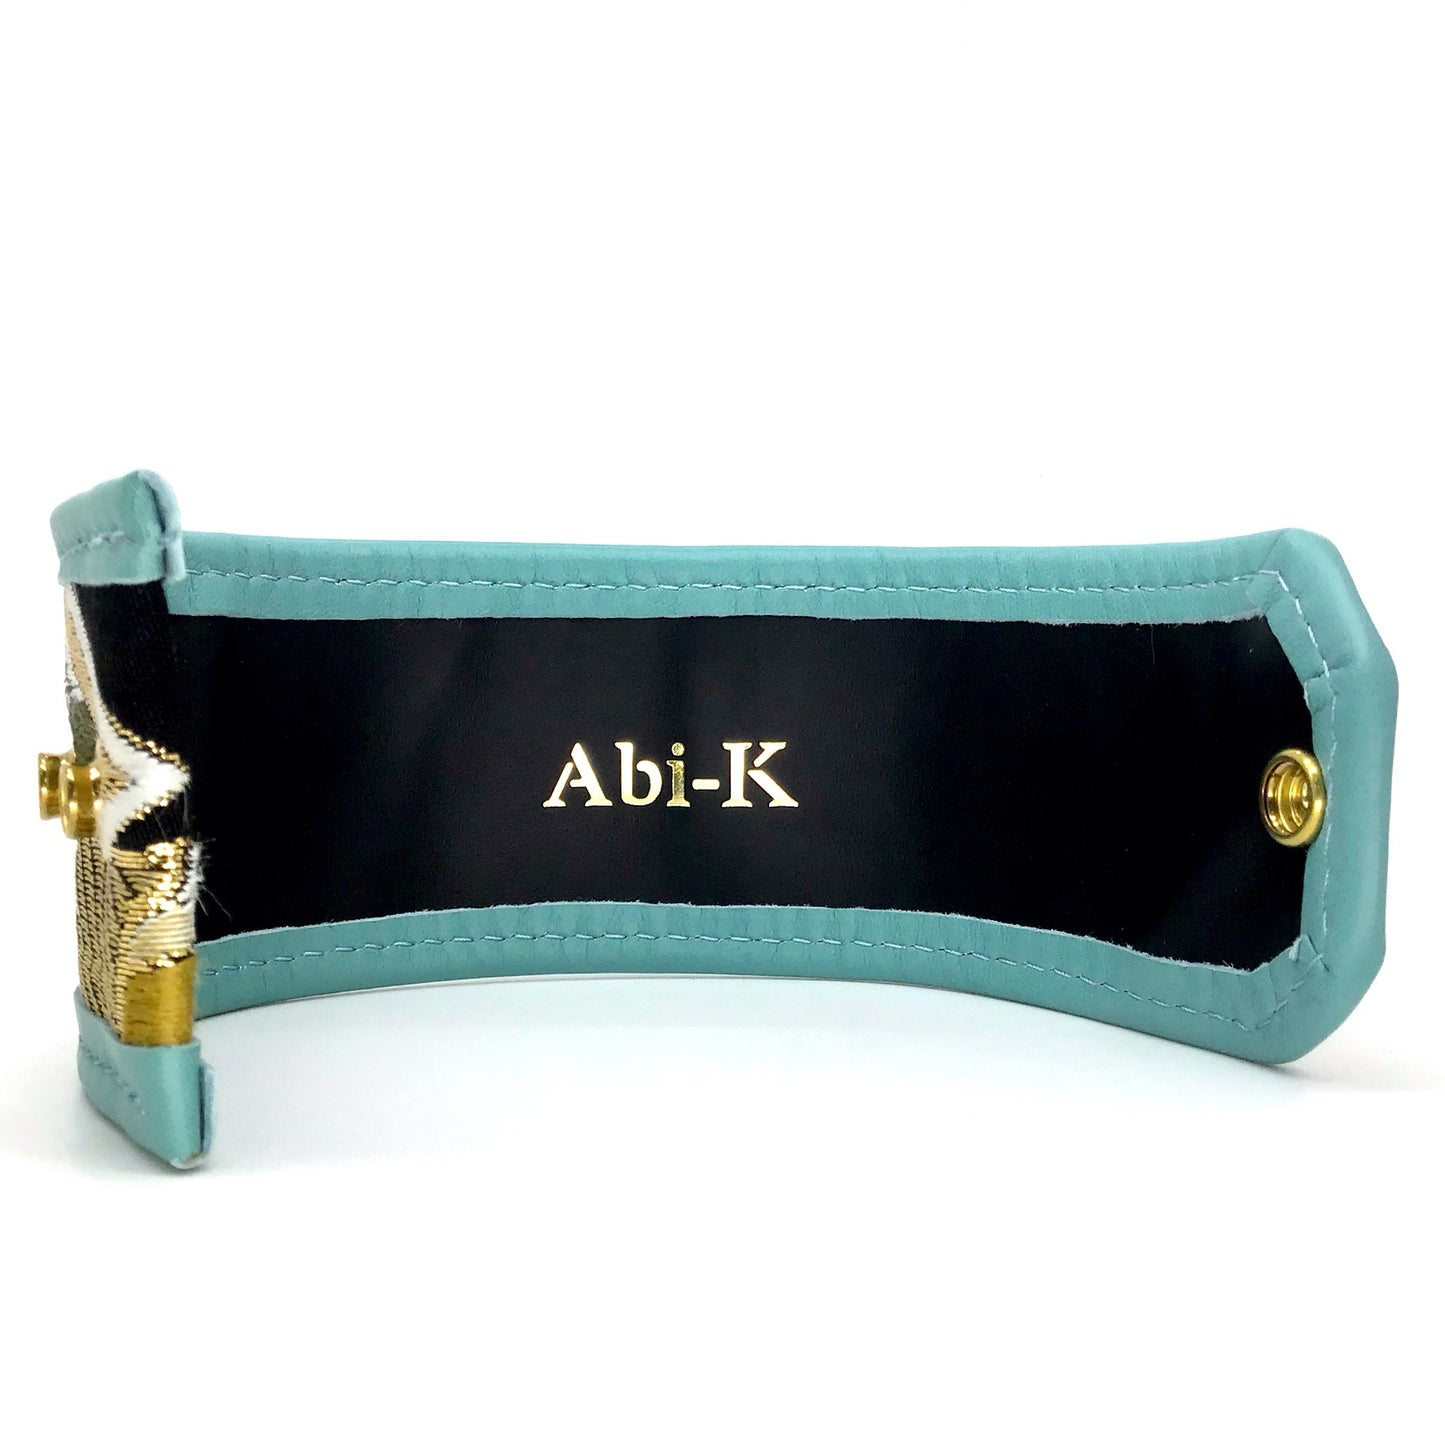 Abi-K Cuff ‘Turquoise Butterfly’ 1/2